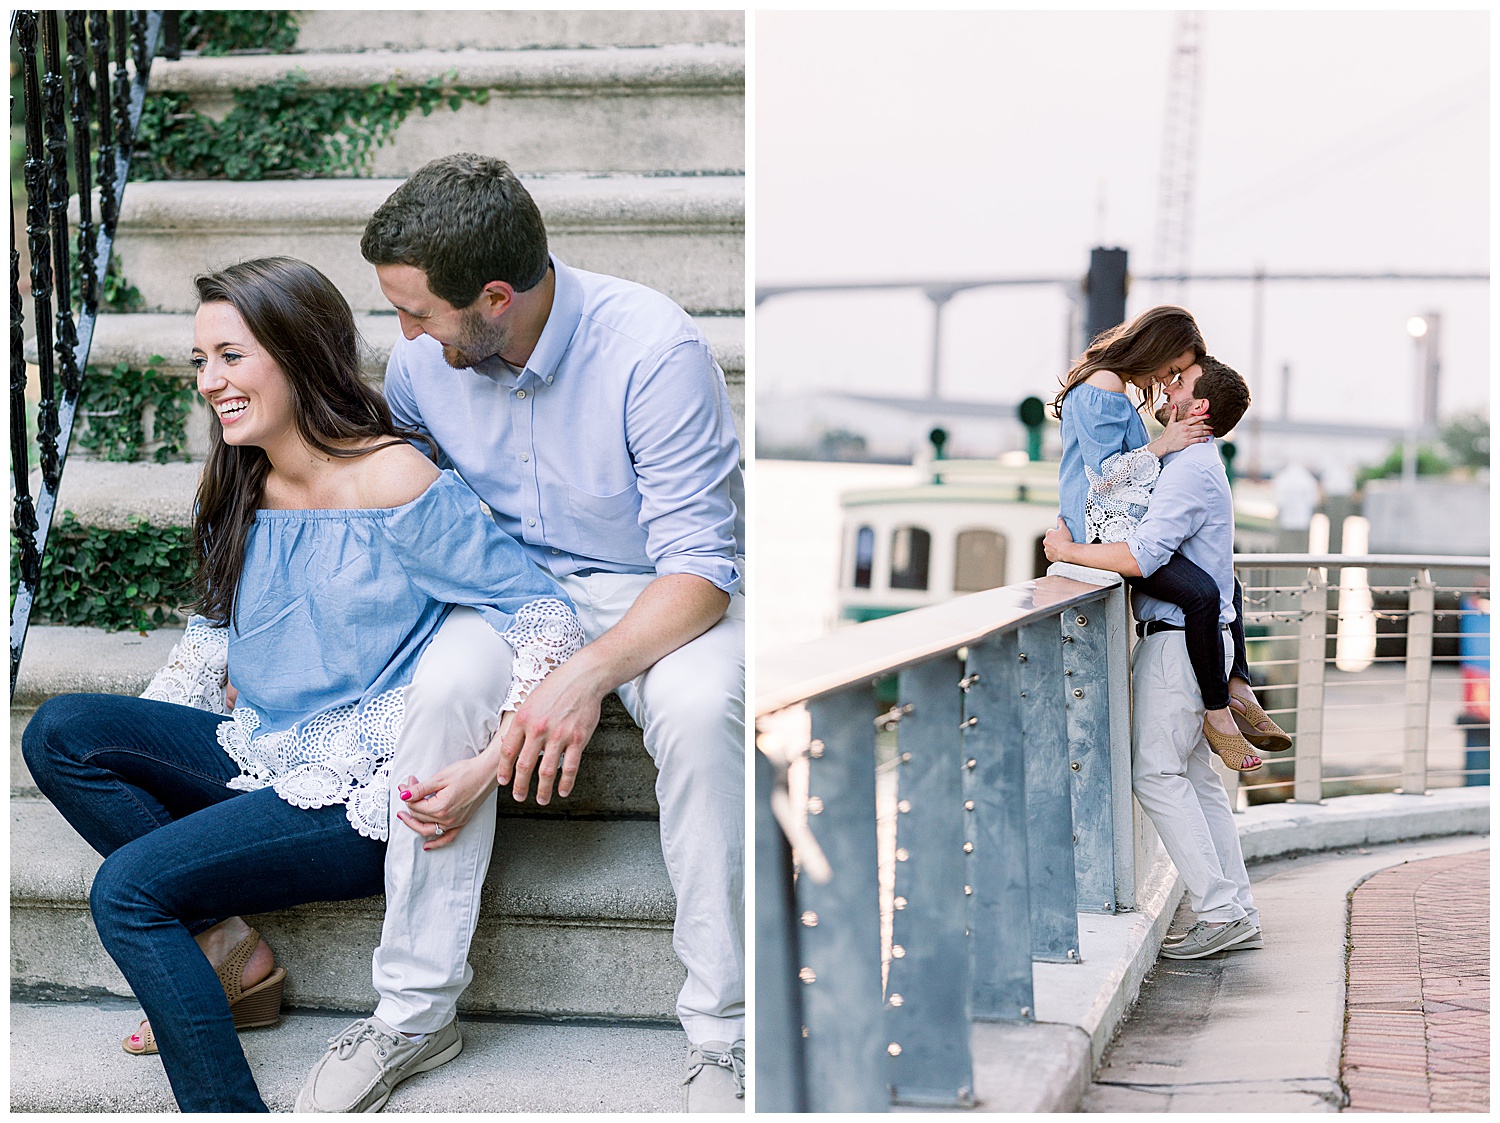 Left: Engaged couple sitting on concrete steps in Savannah, Georgia. Right: Woman sitting on bridge railing while embracing man. 